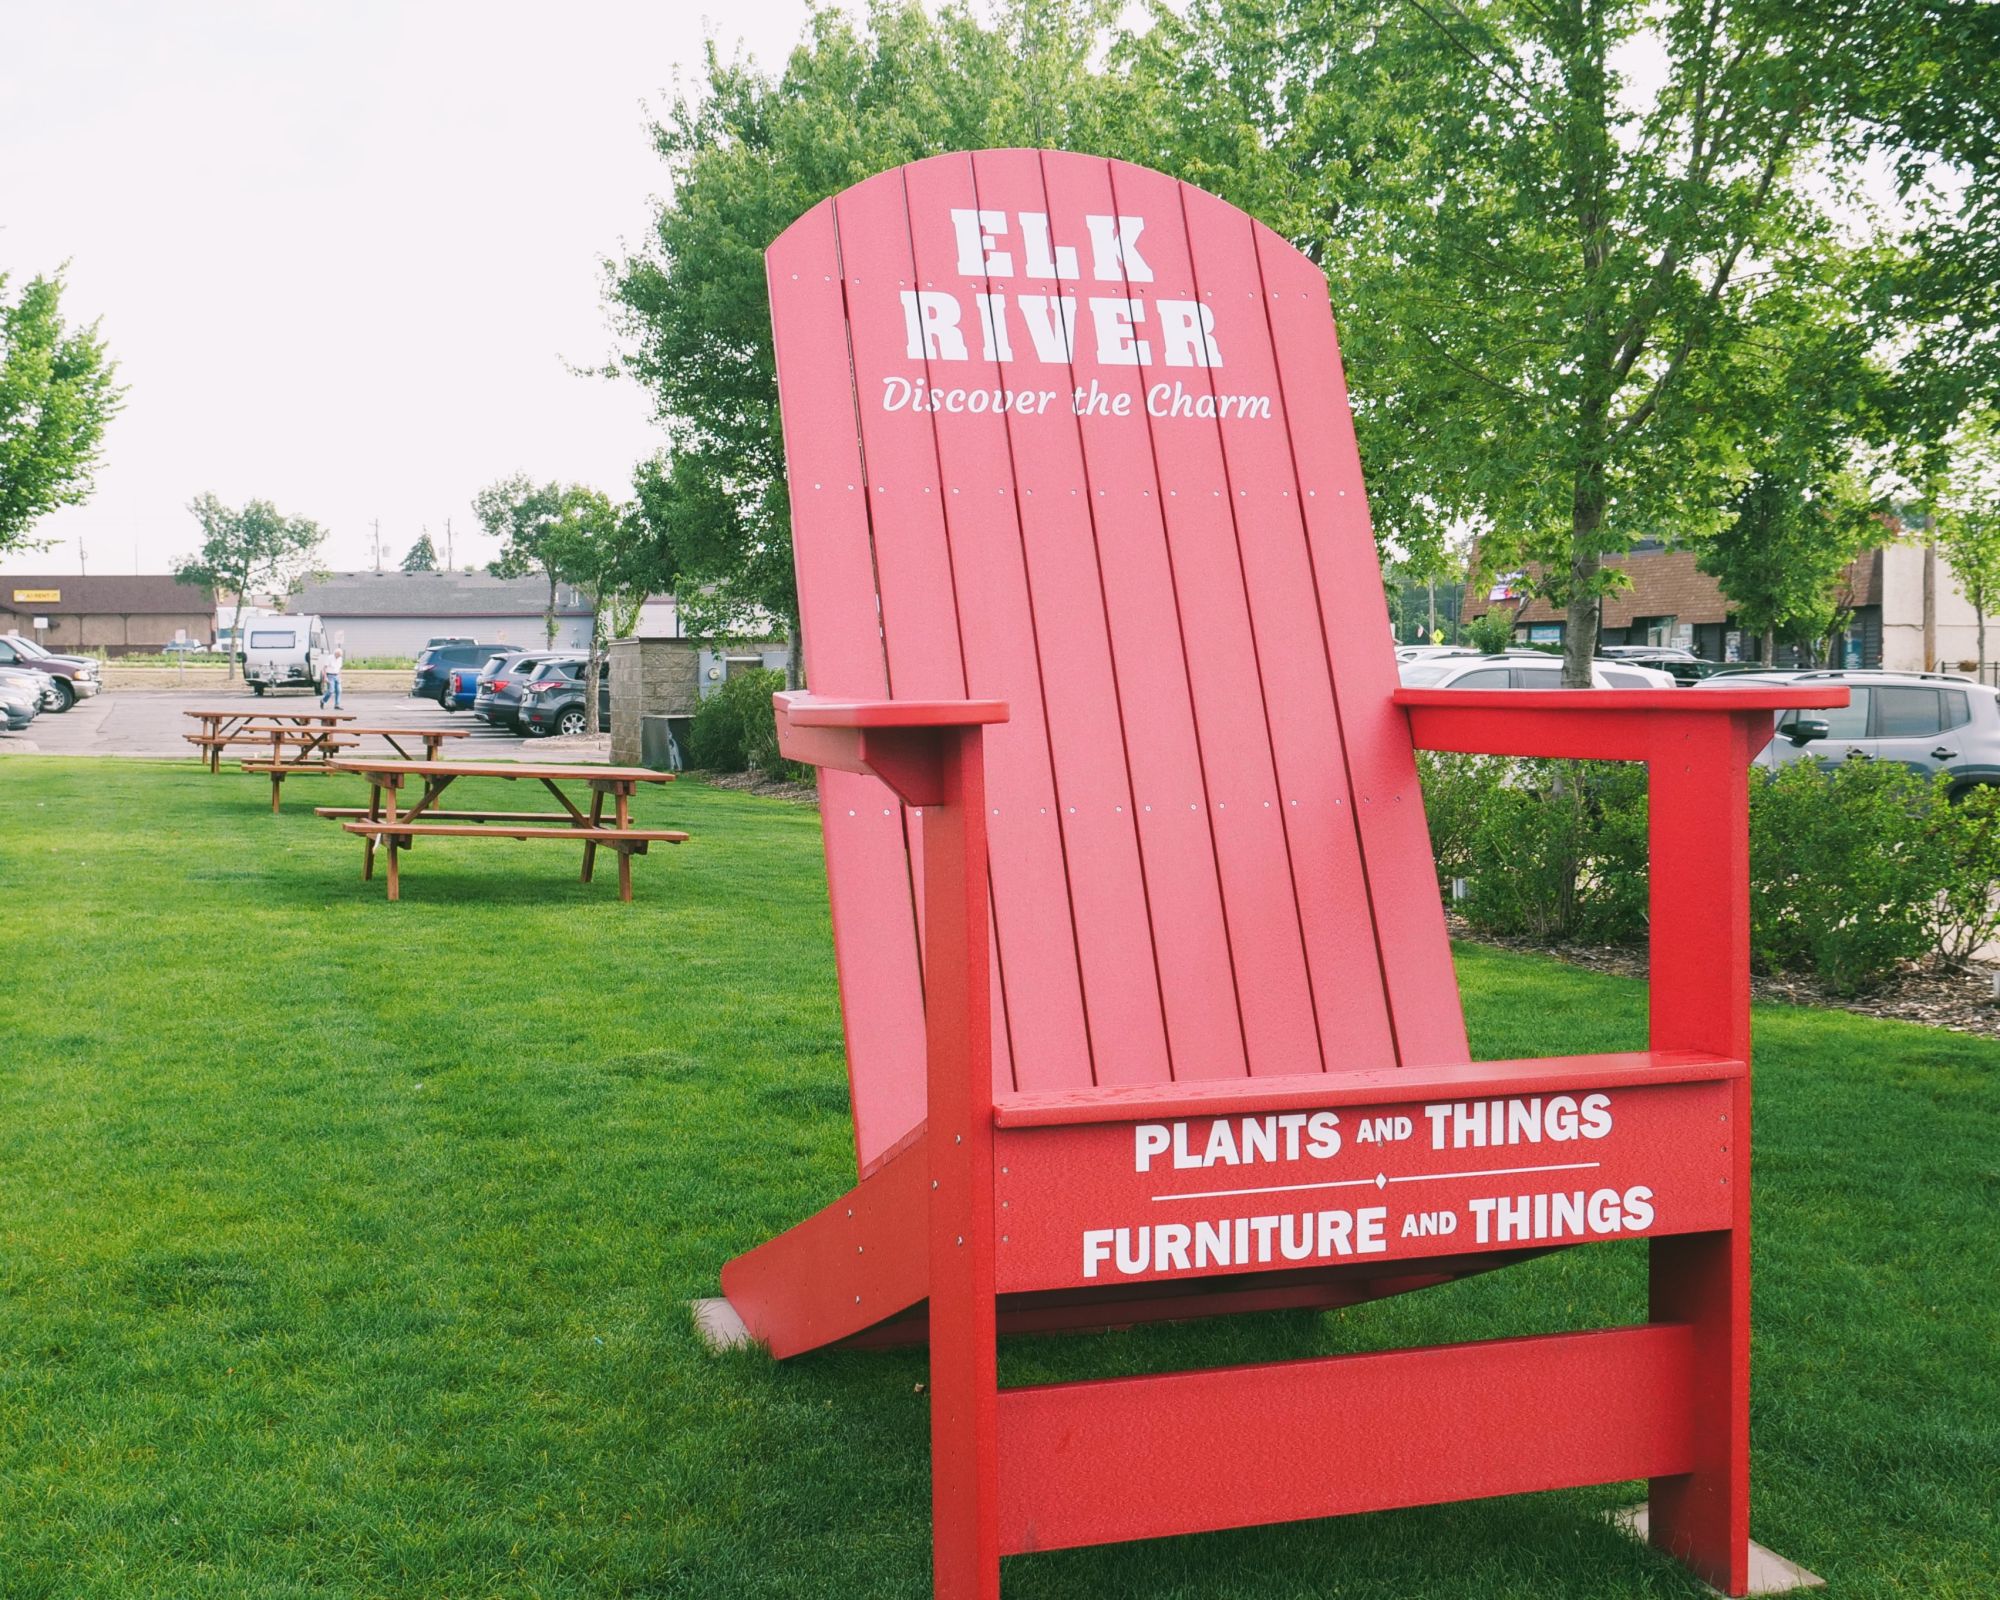 Click the New Perch for Relaxation in Downtown Elk River slide photo to open